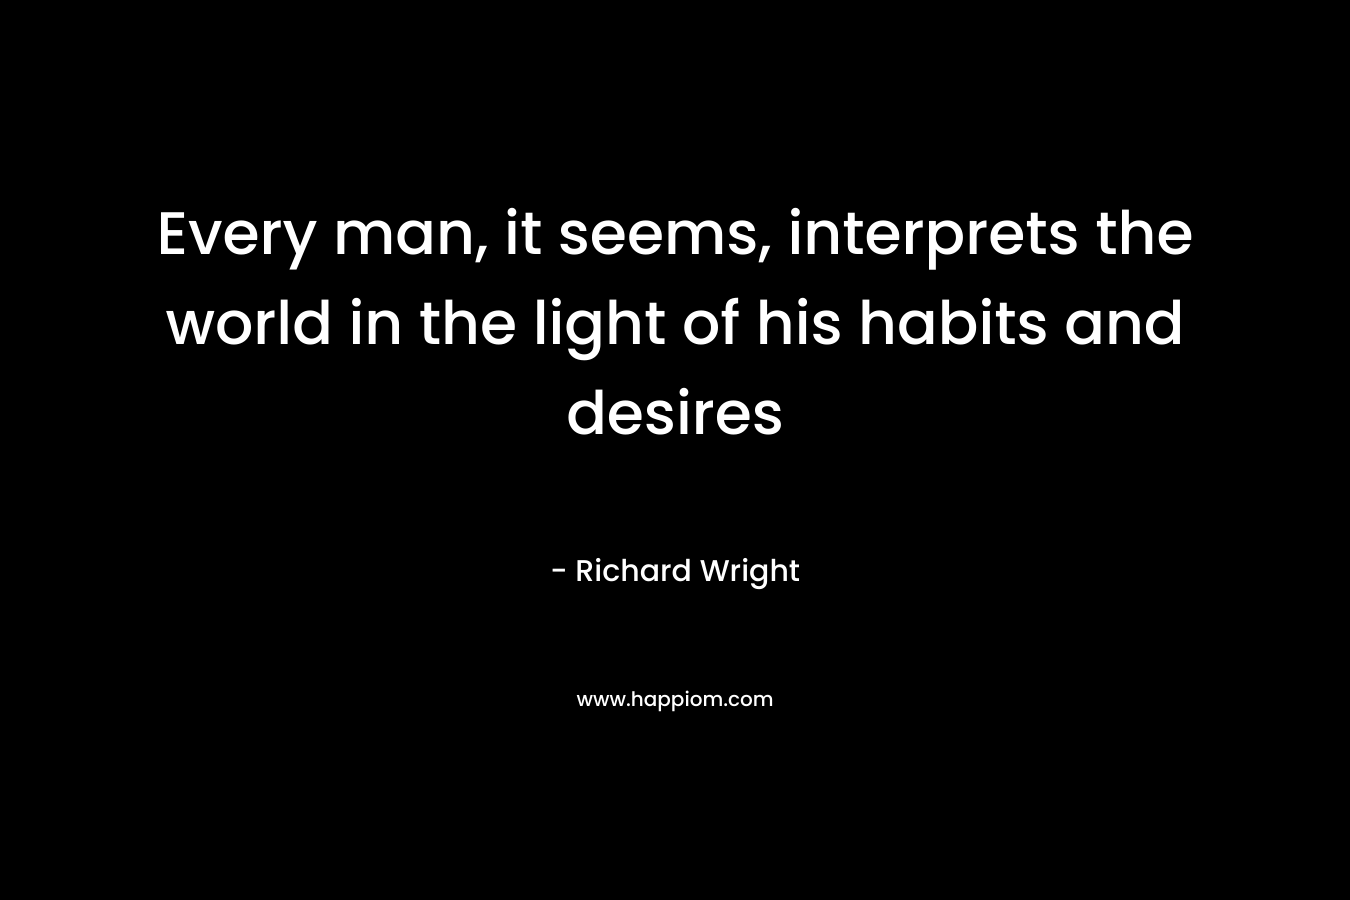 Every man, it seems, interprets the world in the light of his habits and desires – Richard Wright